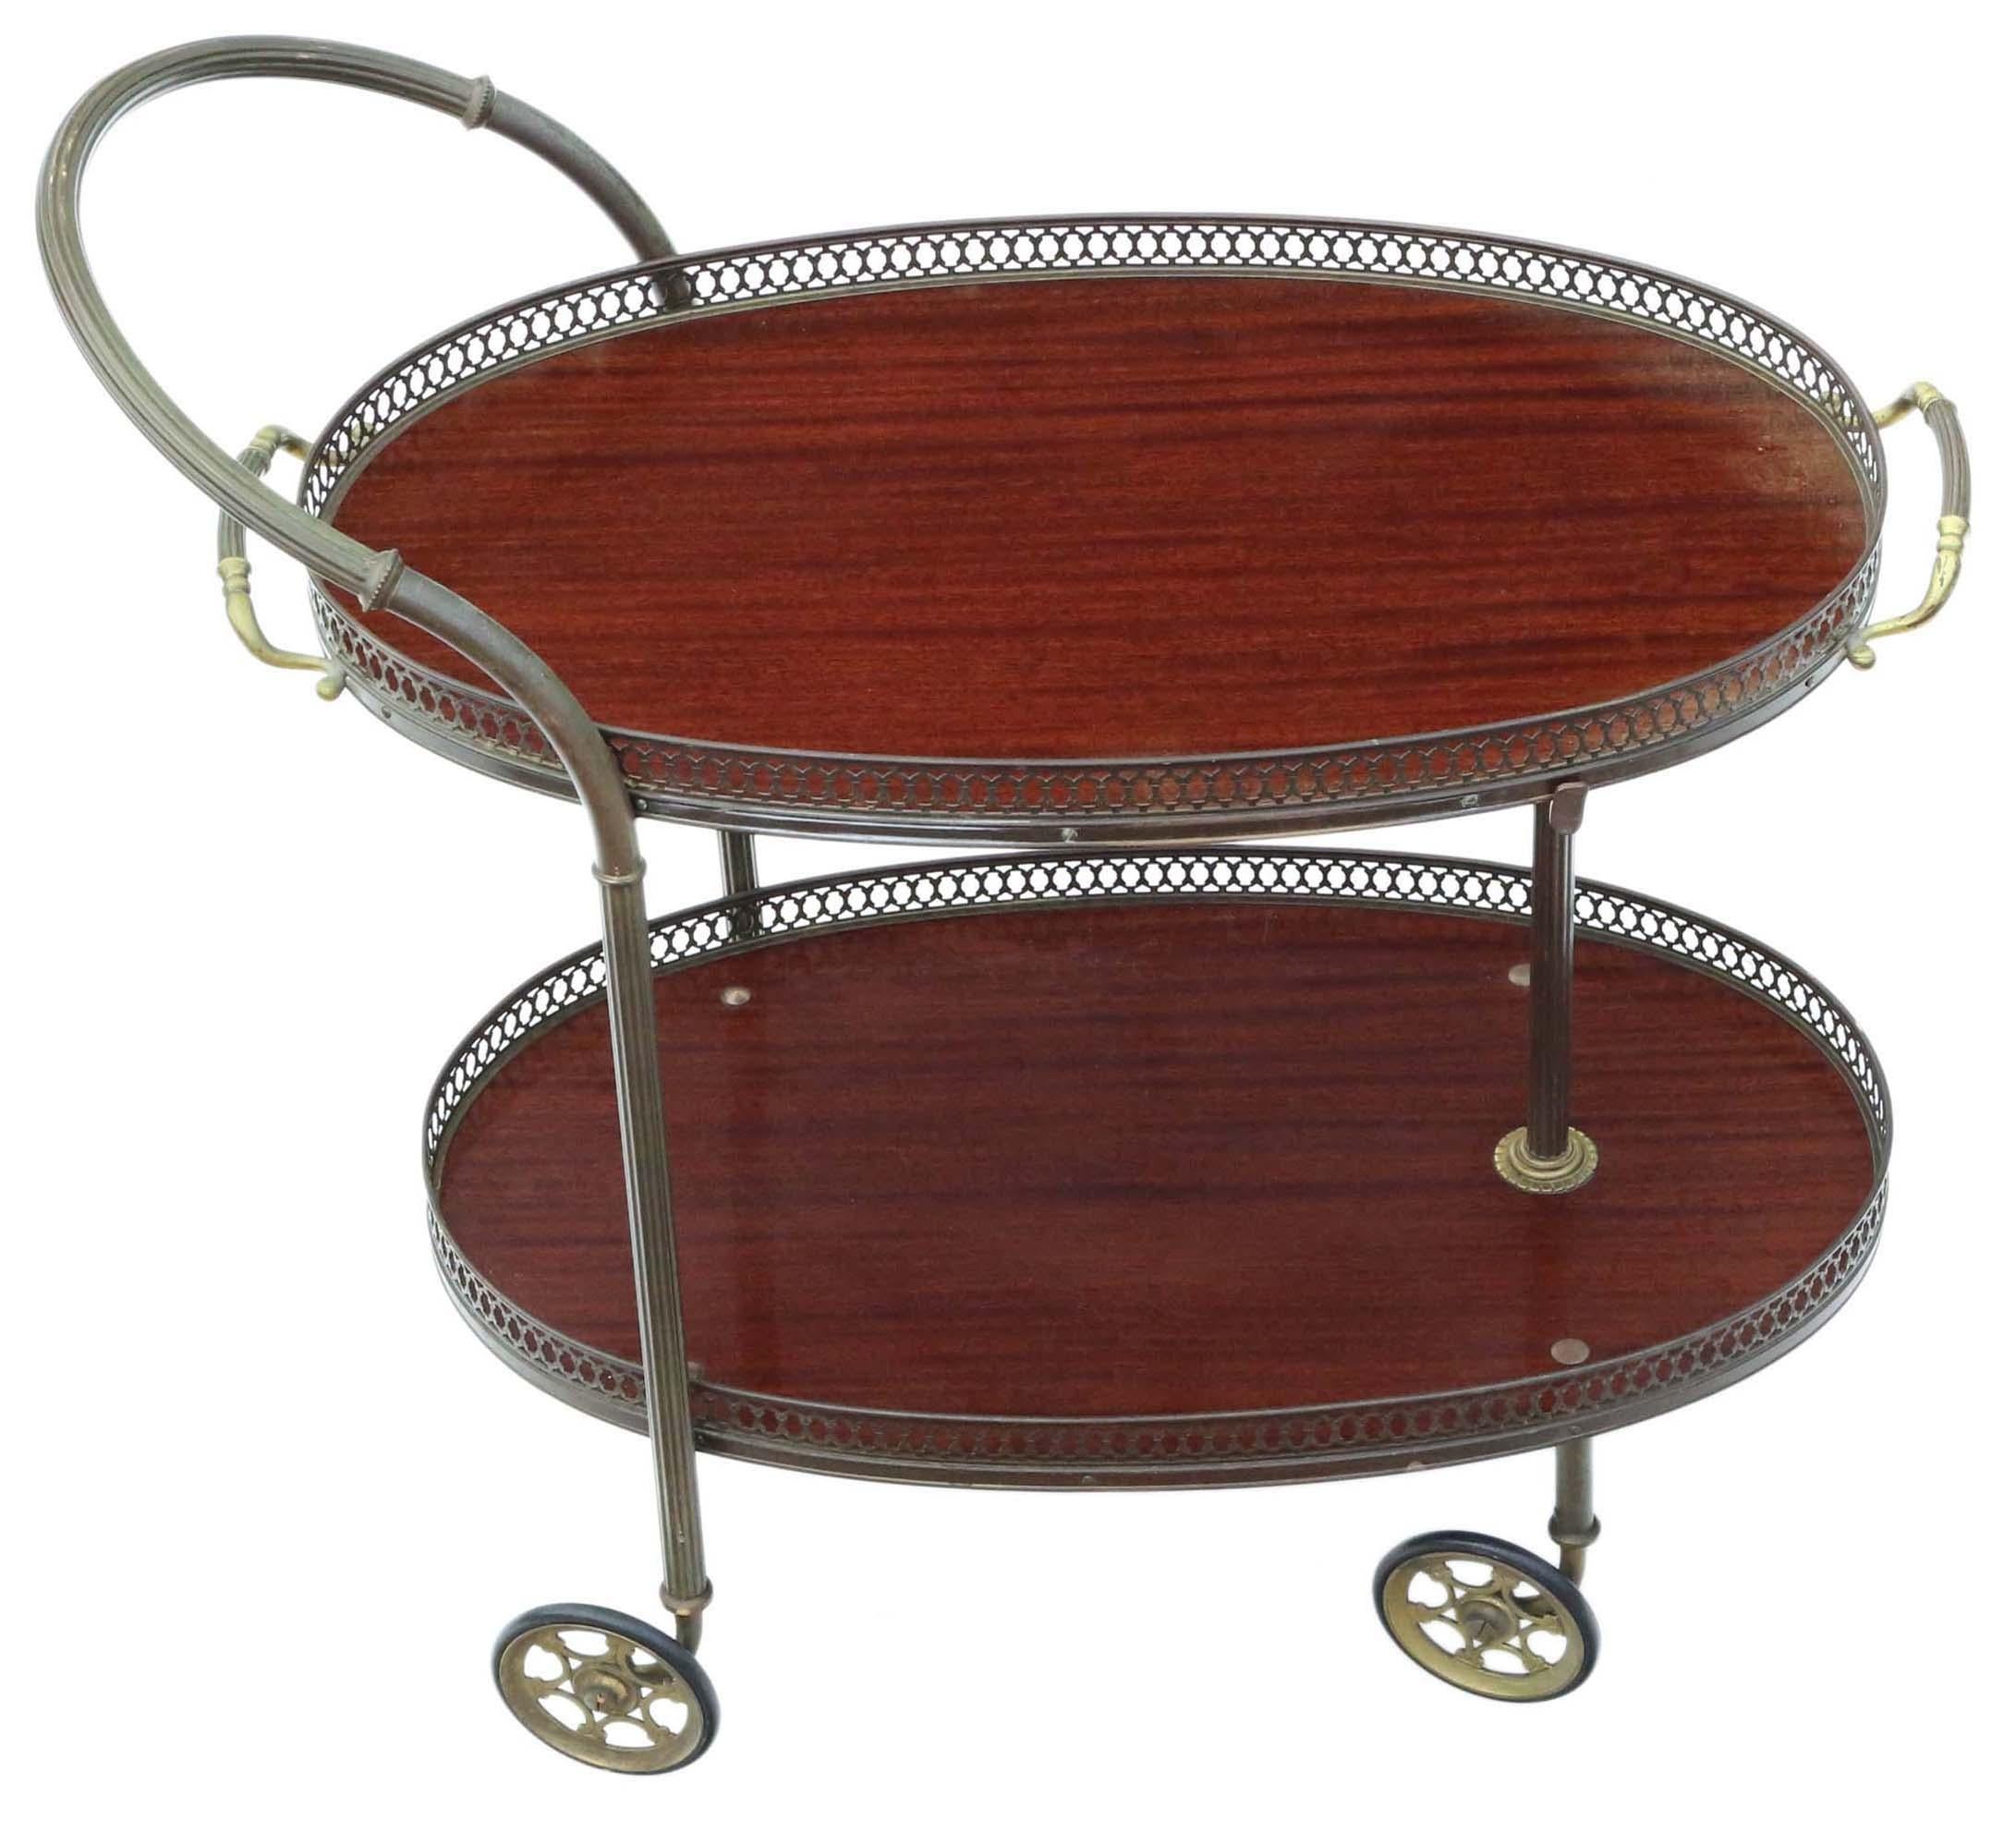 Antique, rare Art Deco mahogany drinks trolley and cake serving table, featuring impressive wheels that add to its allure.

This beautiful and uncommon piece exudes quality, showcasing age, charm, and character. The serving tray can be lifted off